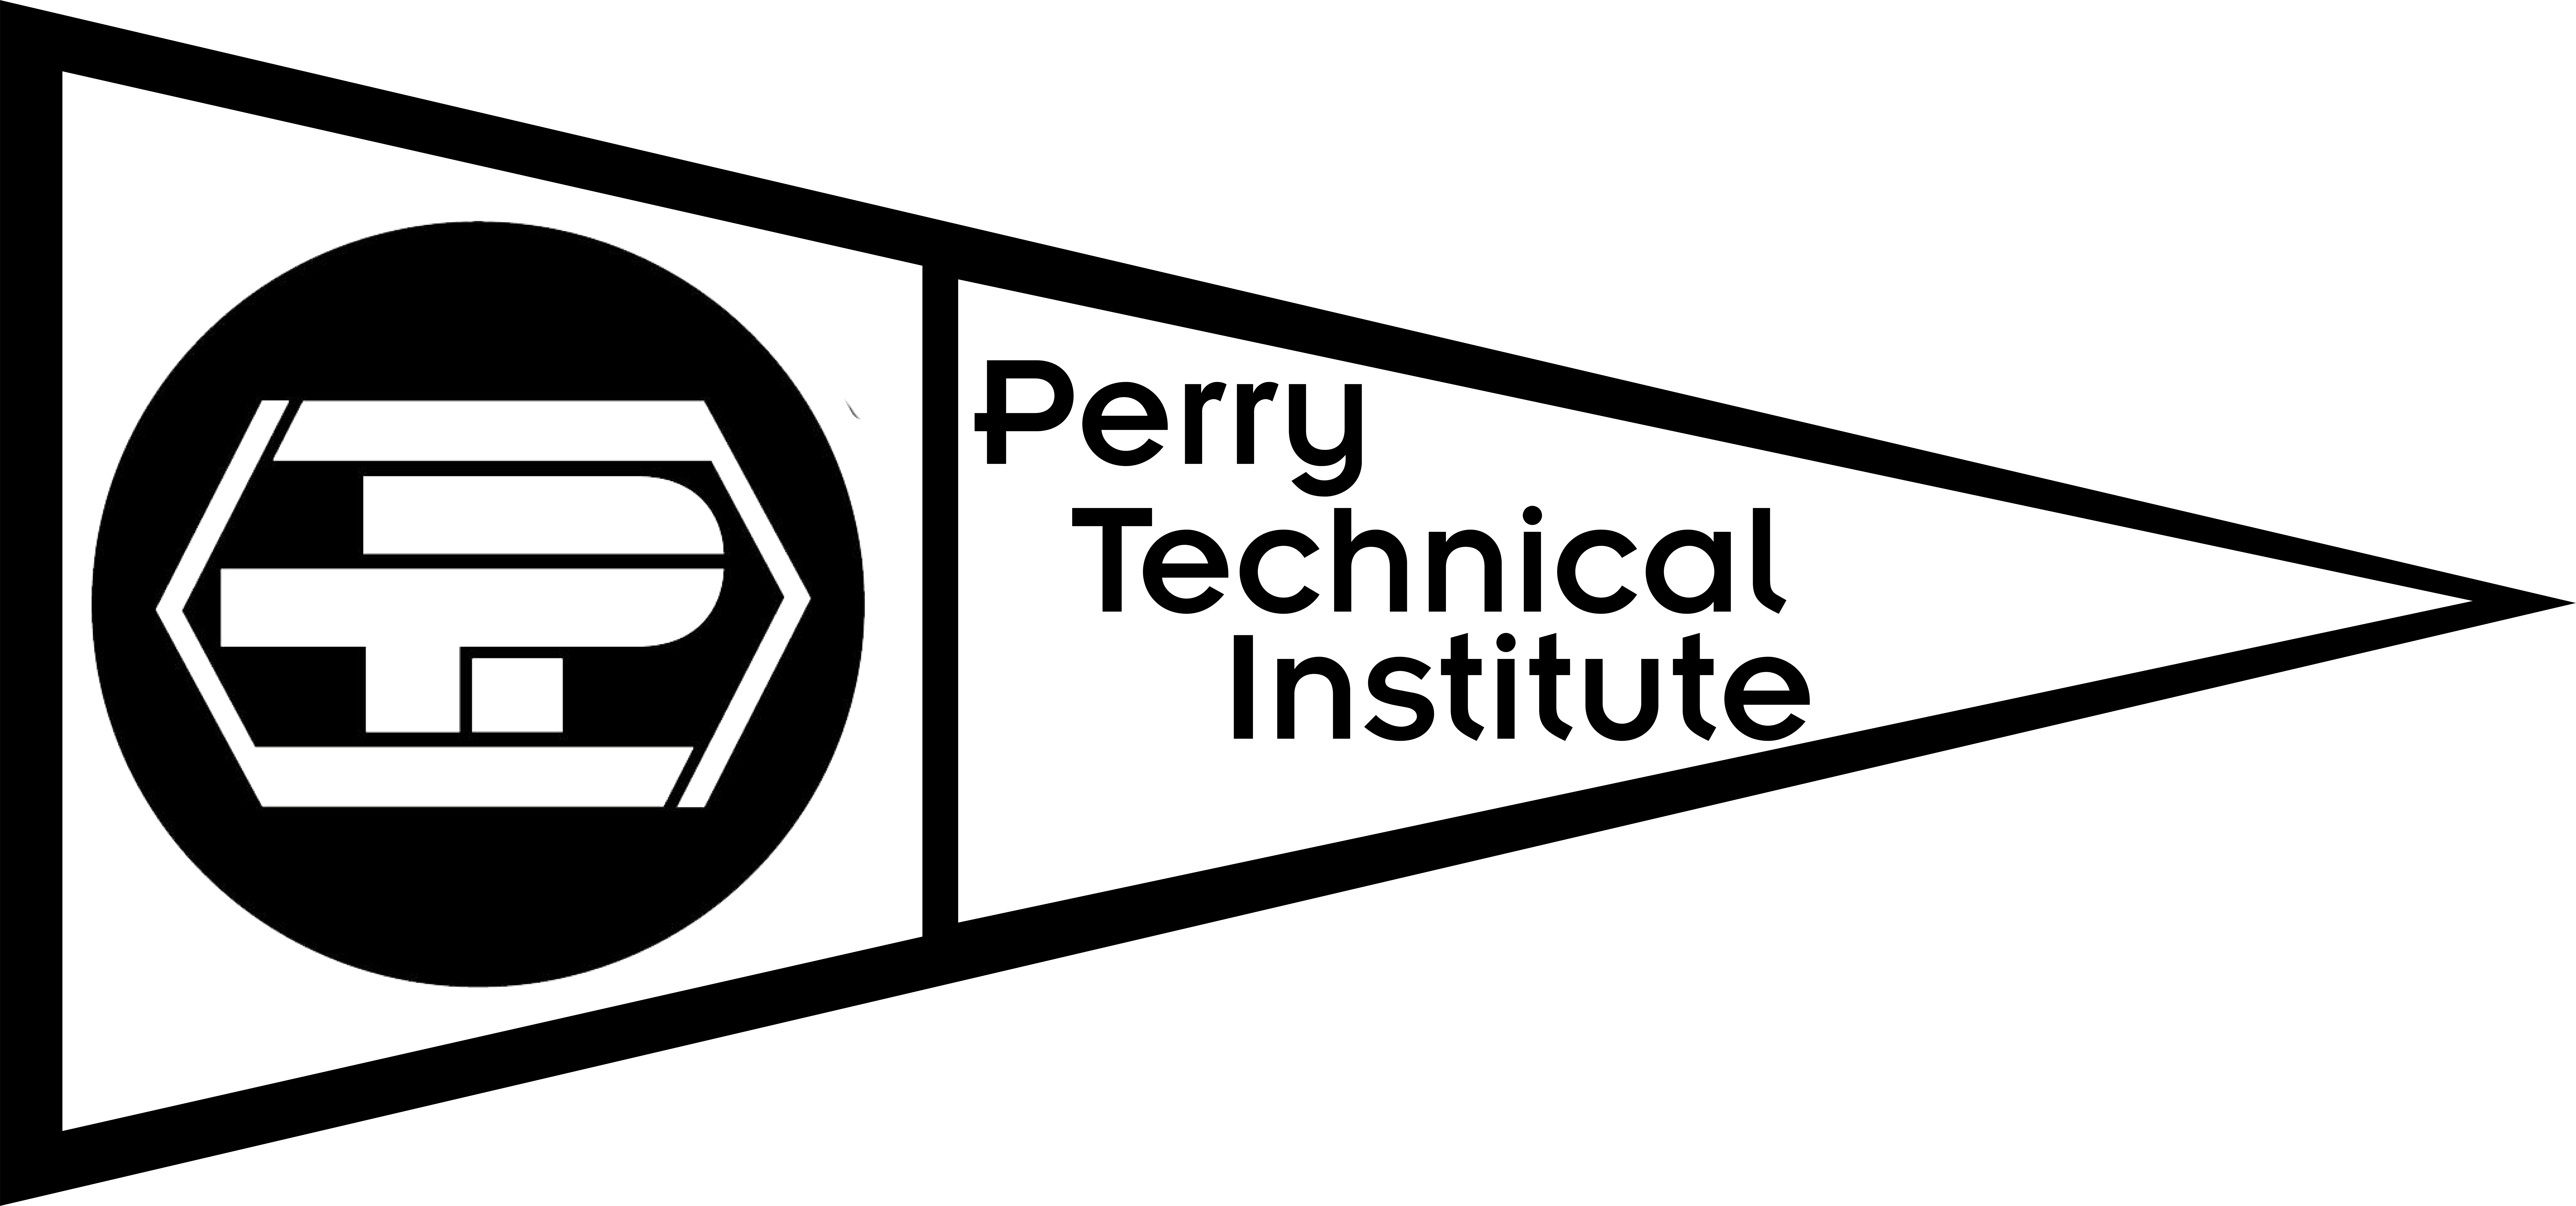 Perry Technical Institute Pennant Gear Up